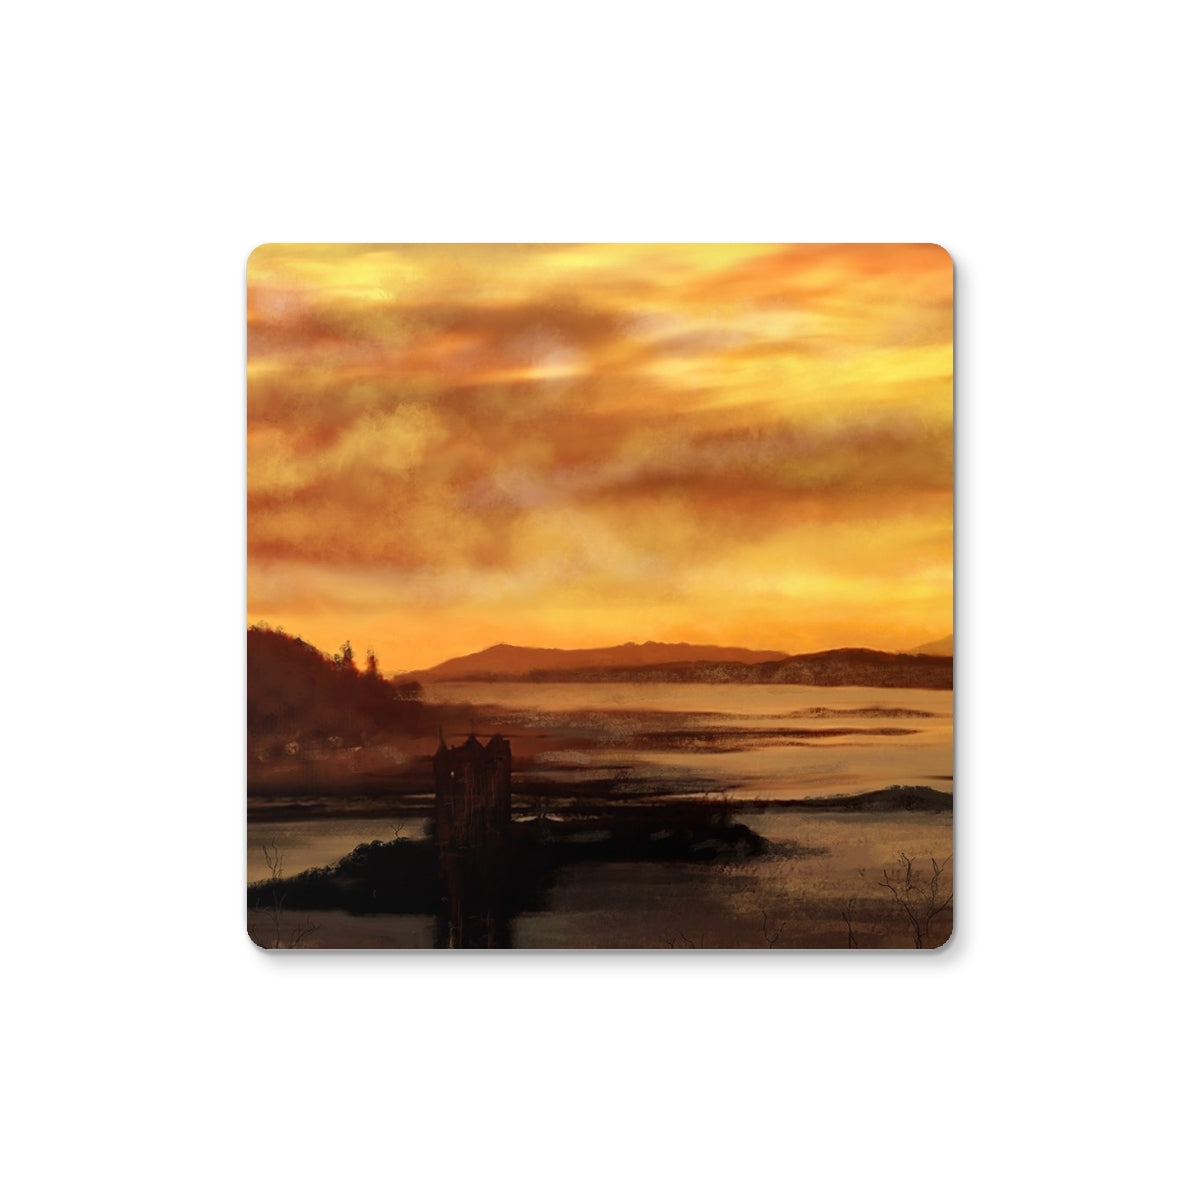 Castle Stalker Dusk Art Gifts Coaster-Coasters-Historic & Iconic Scotland Art Gallery-6 Coasters-Paintings, Prints, Homeware, Art Gifts From Scotland By Scottish Artist Kevin Hunter